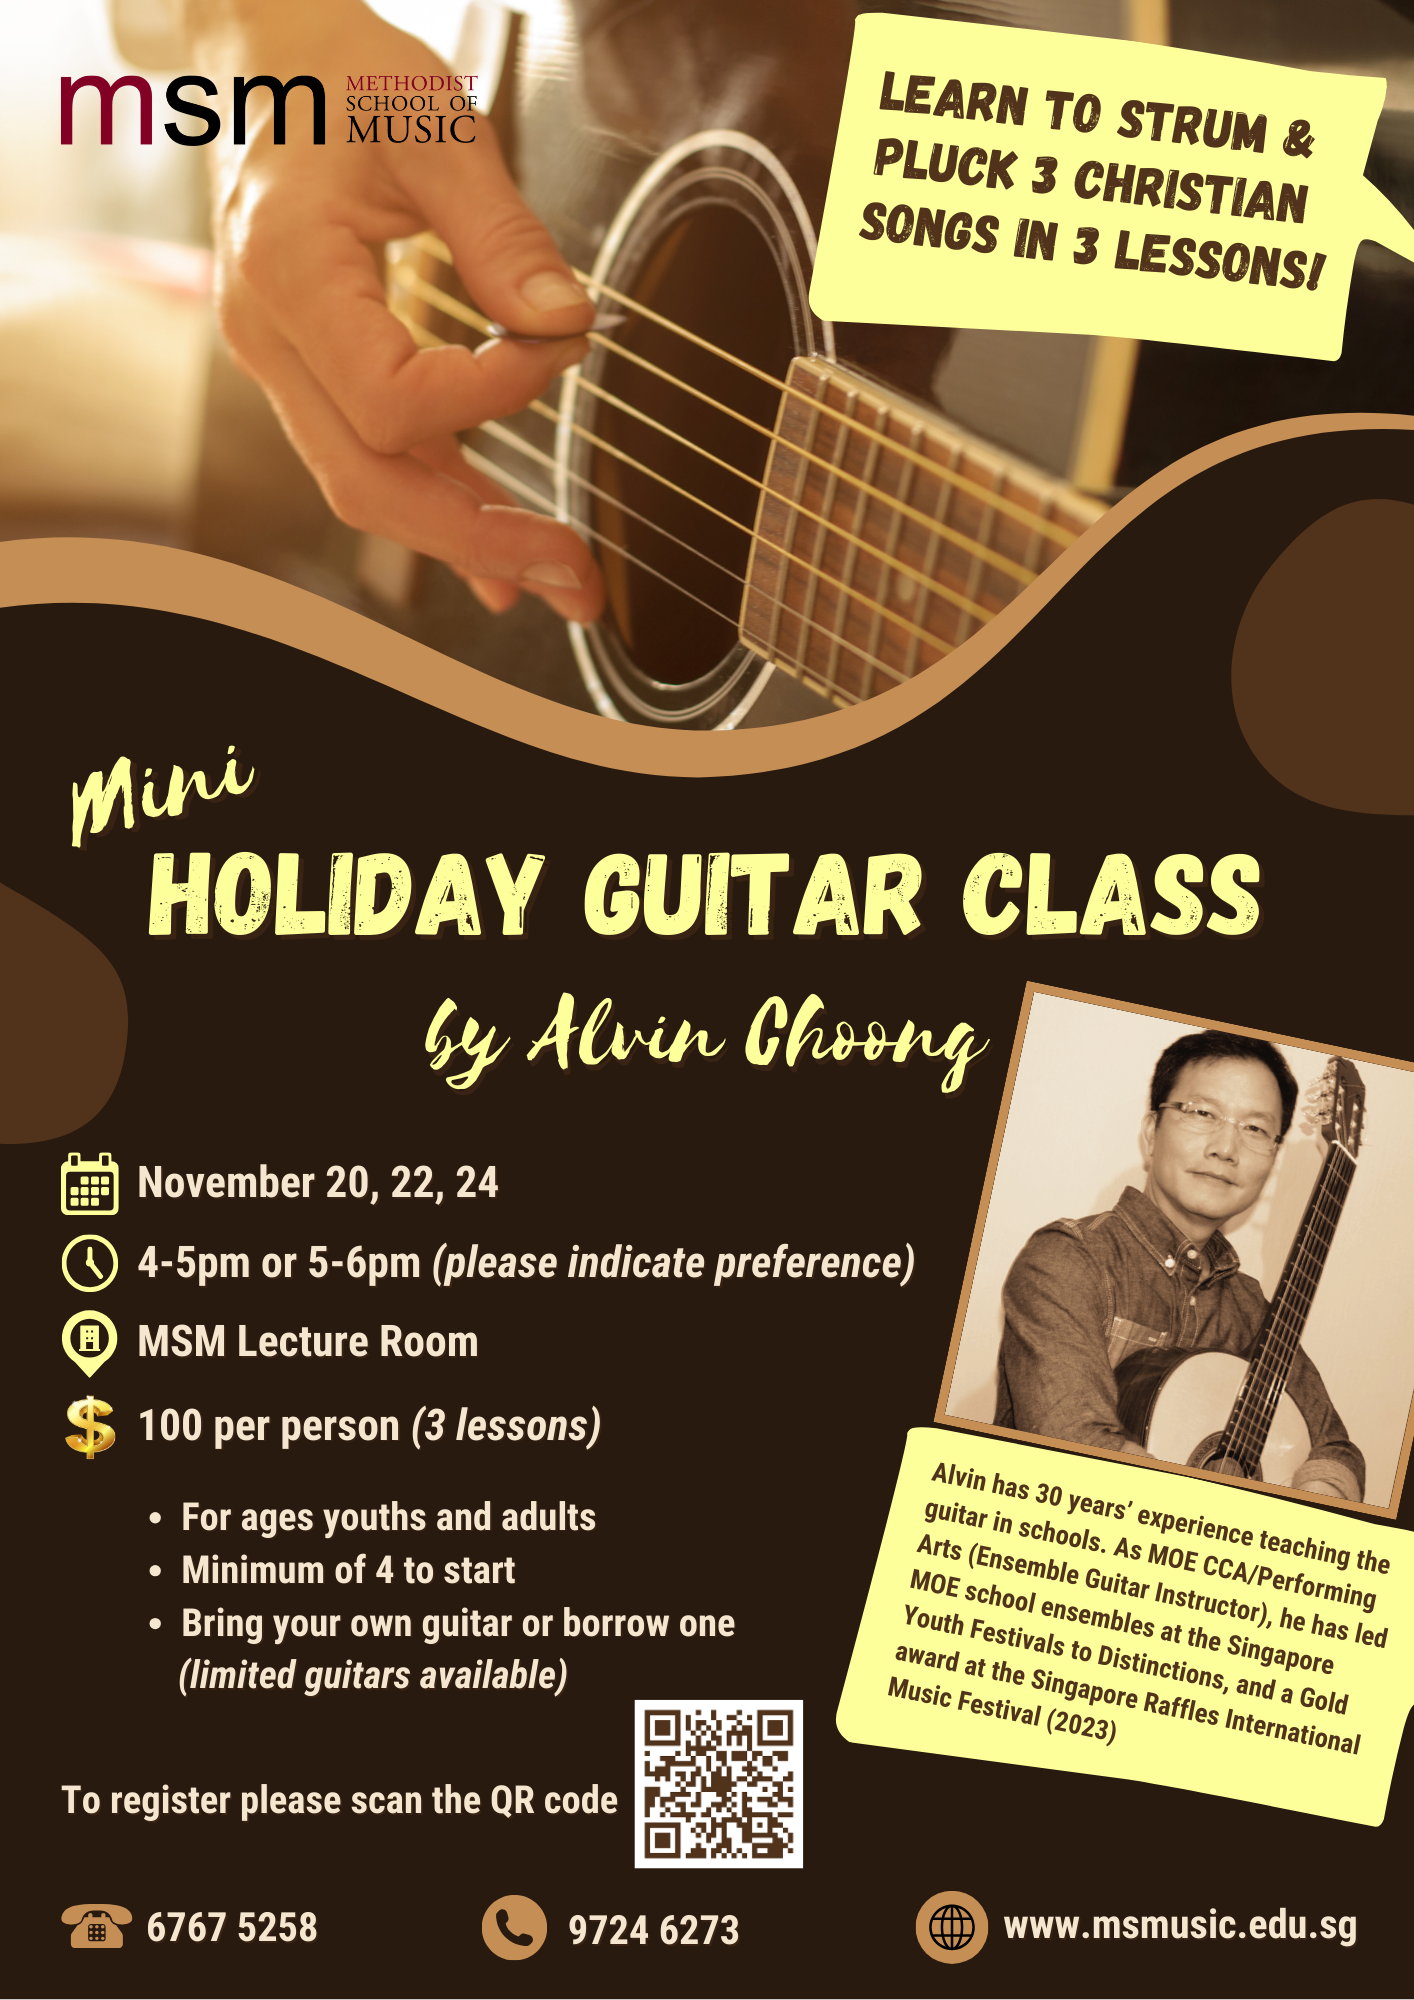 Mini Holiday Guitar Class by Alvin Choong